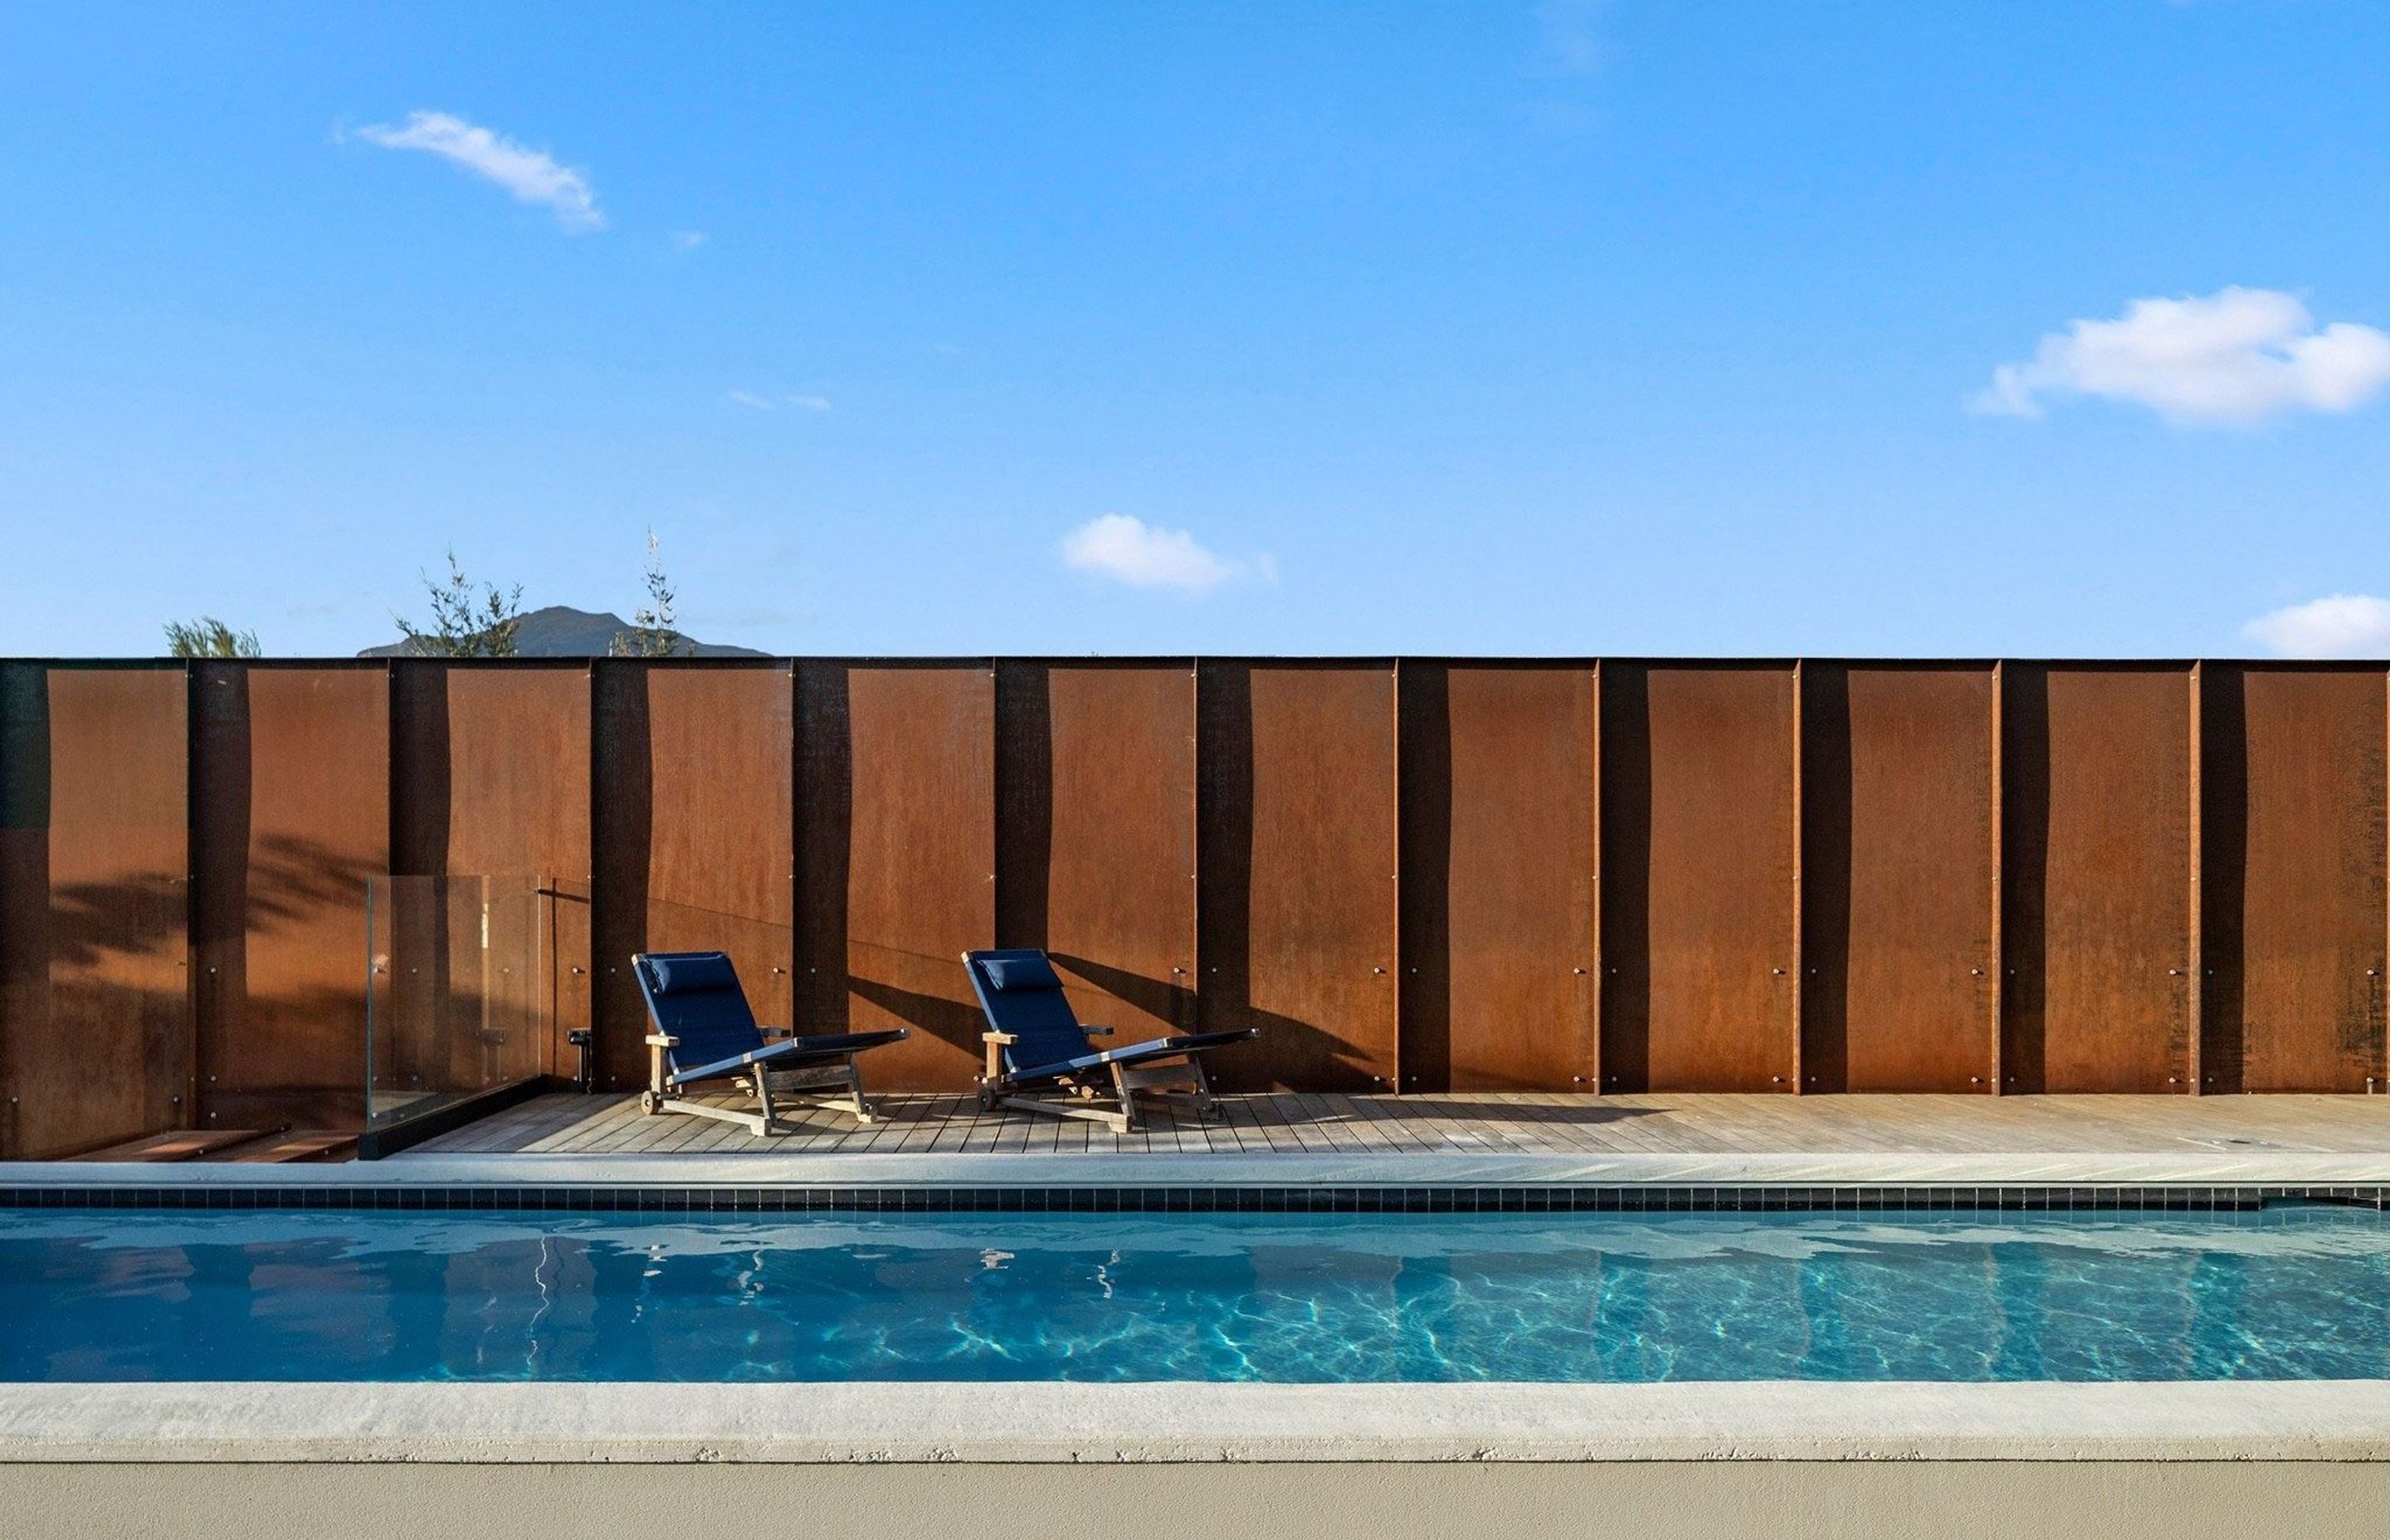 Custom Corten panels have been used to create a fence that not only provides privacy but will also continue to patina over time adding an element of permanency and immutability.